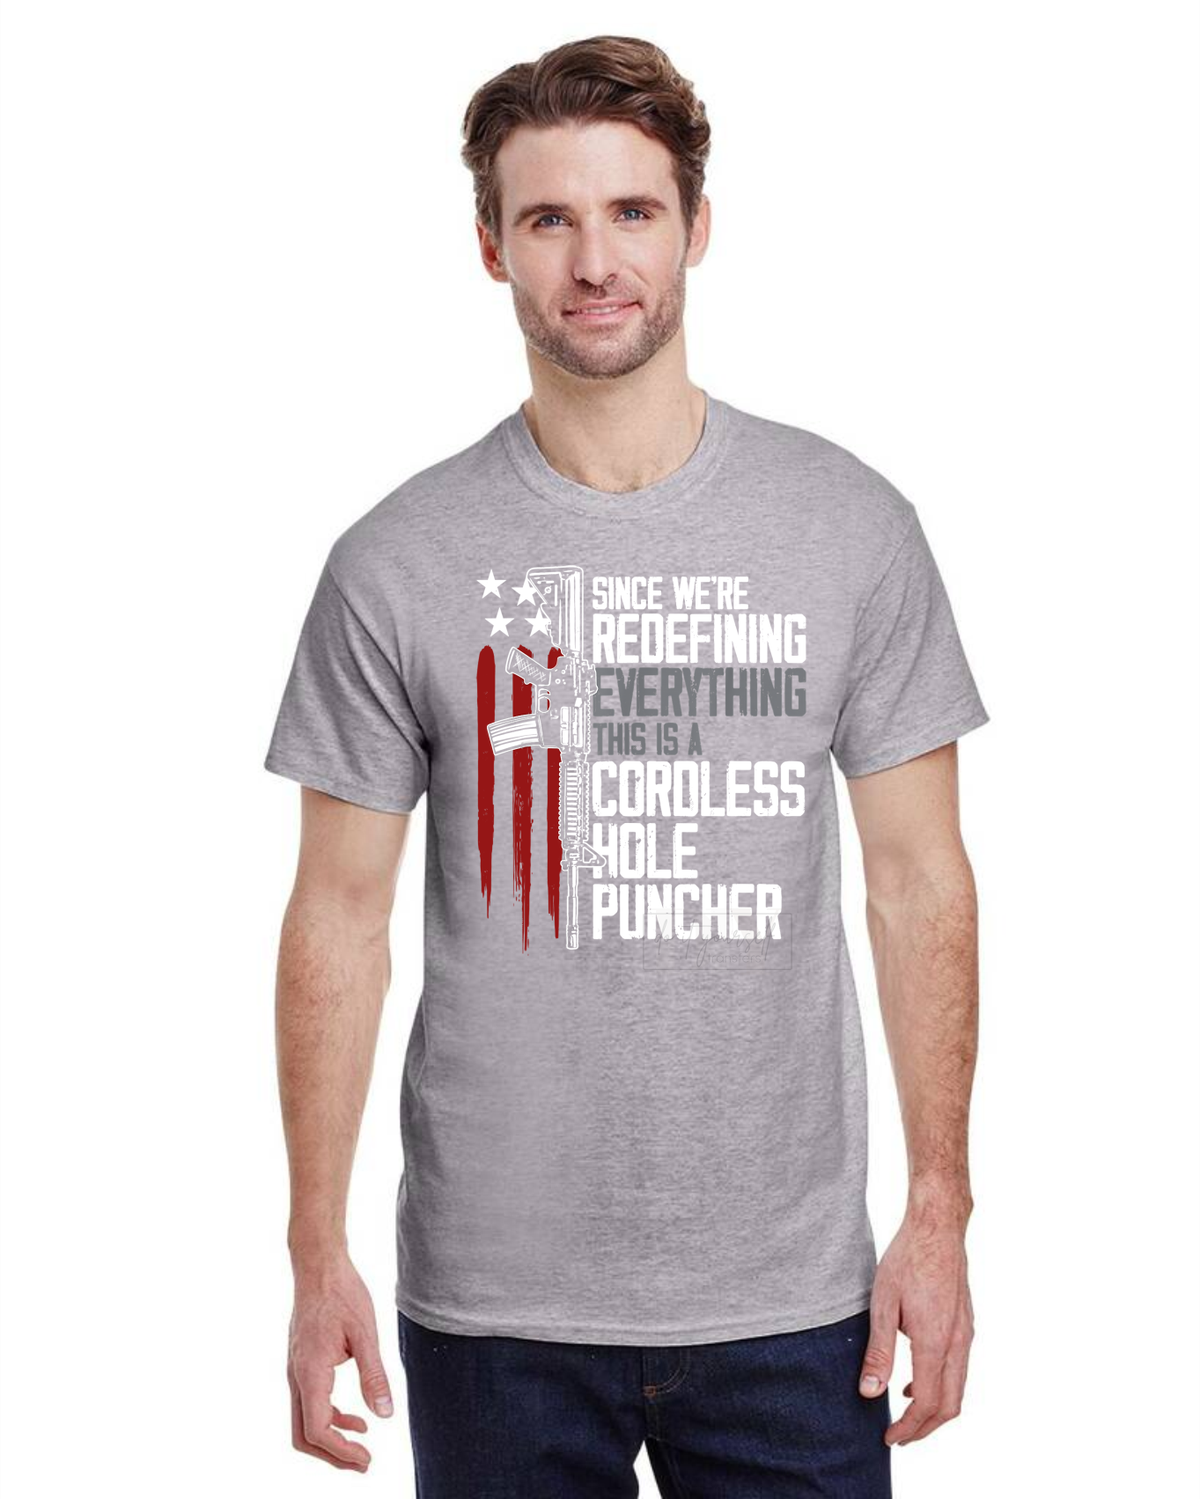 Since we're redefing everything this is a cordless hole puncher american flag  size ADULT 12.8x11 DTF TRANSFERPRINT TO ORDER